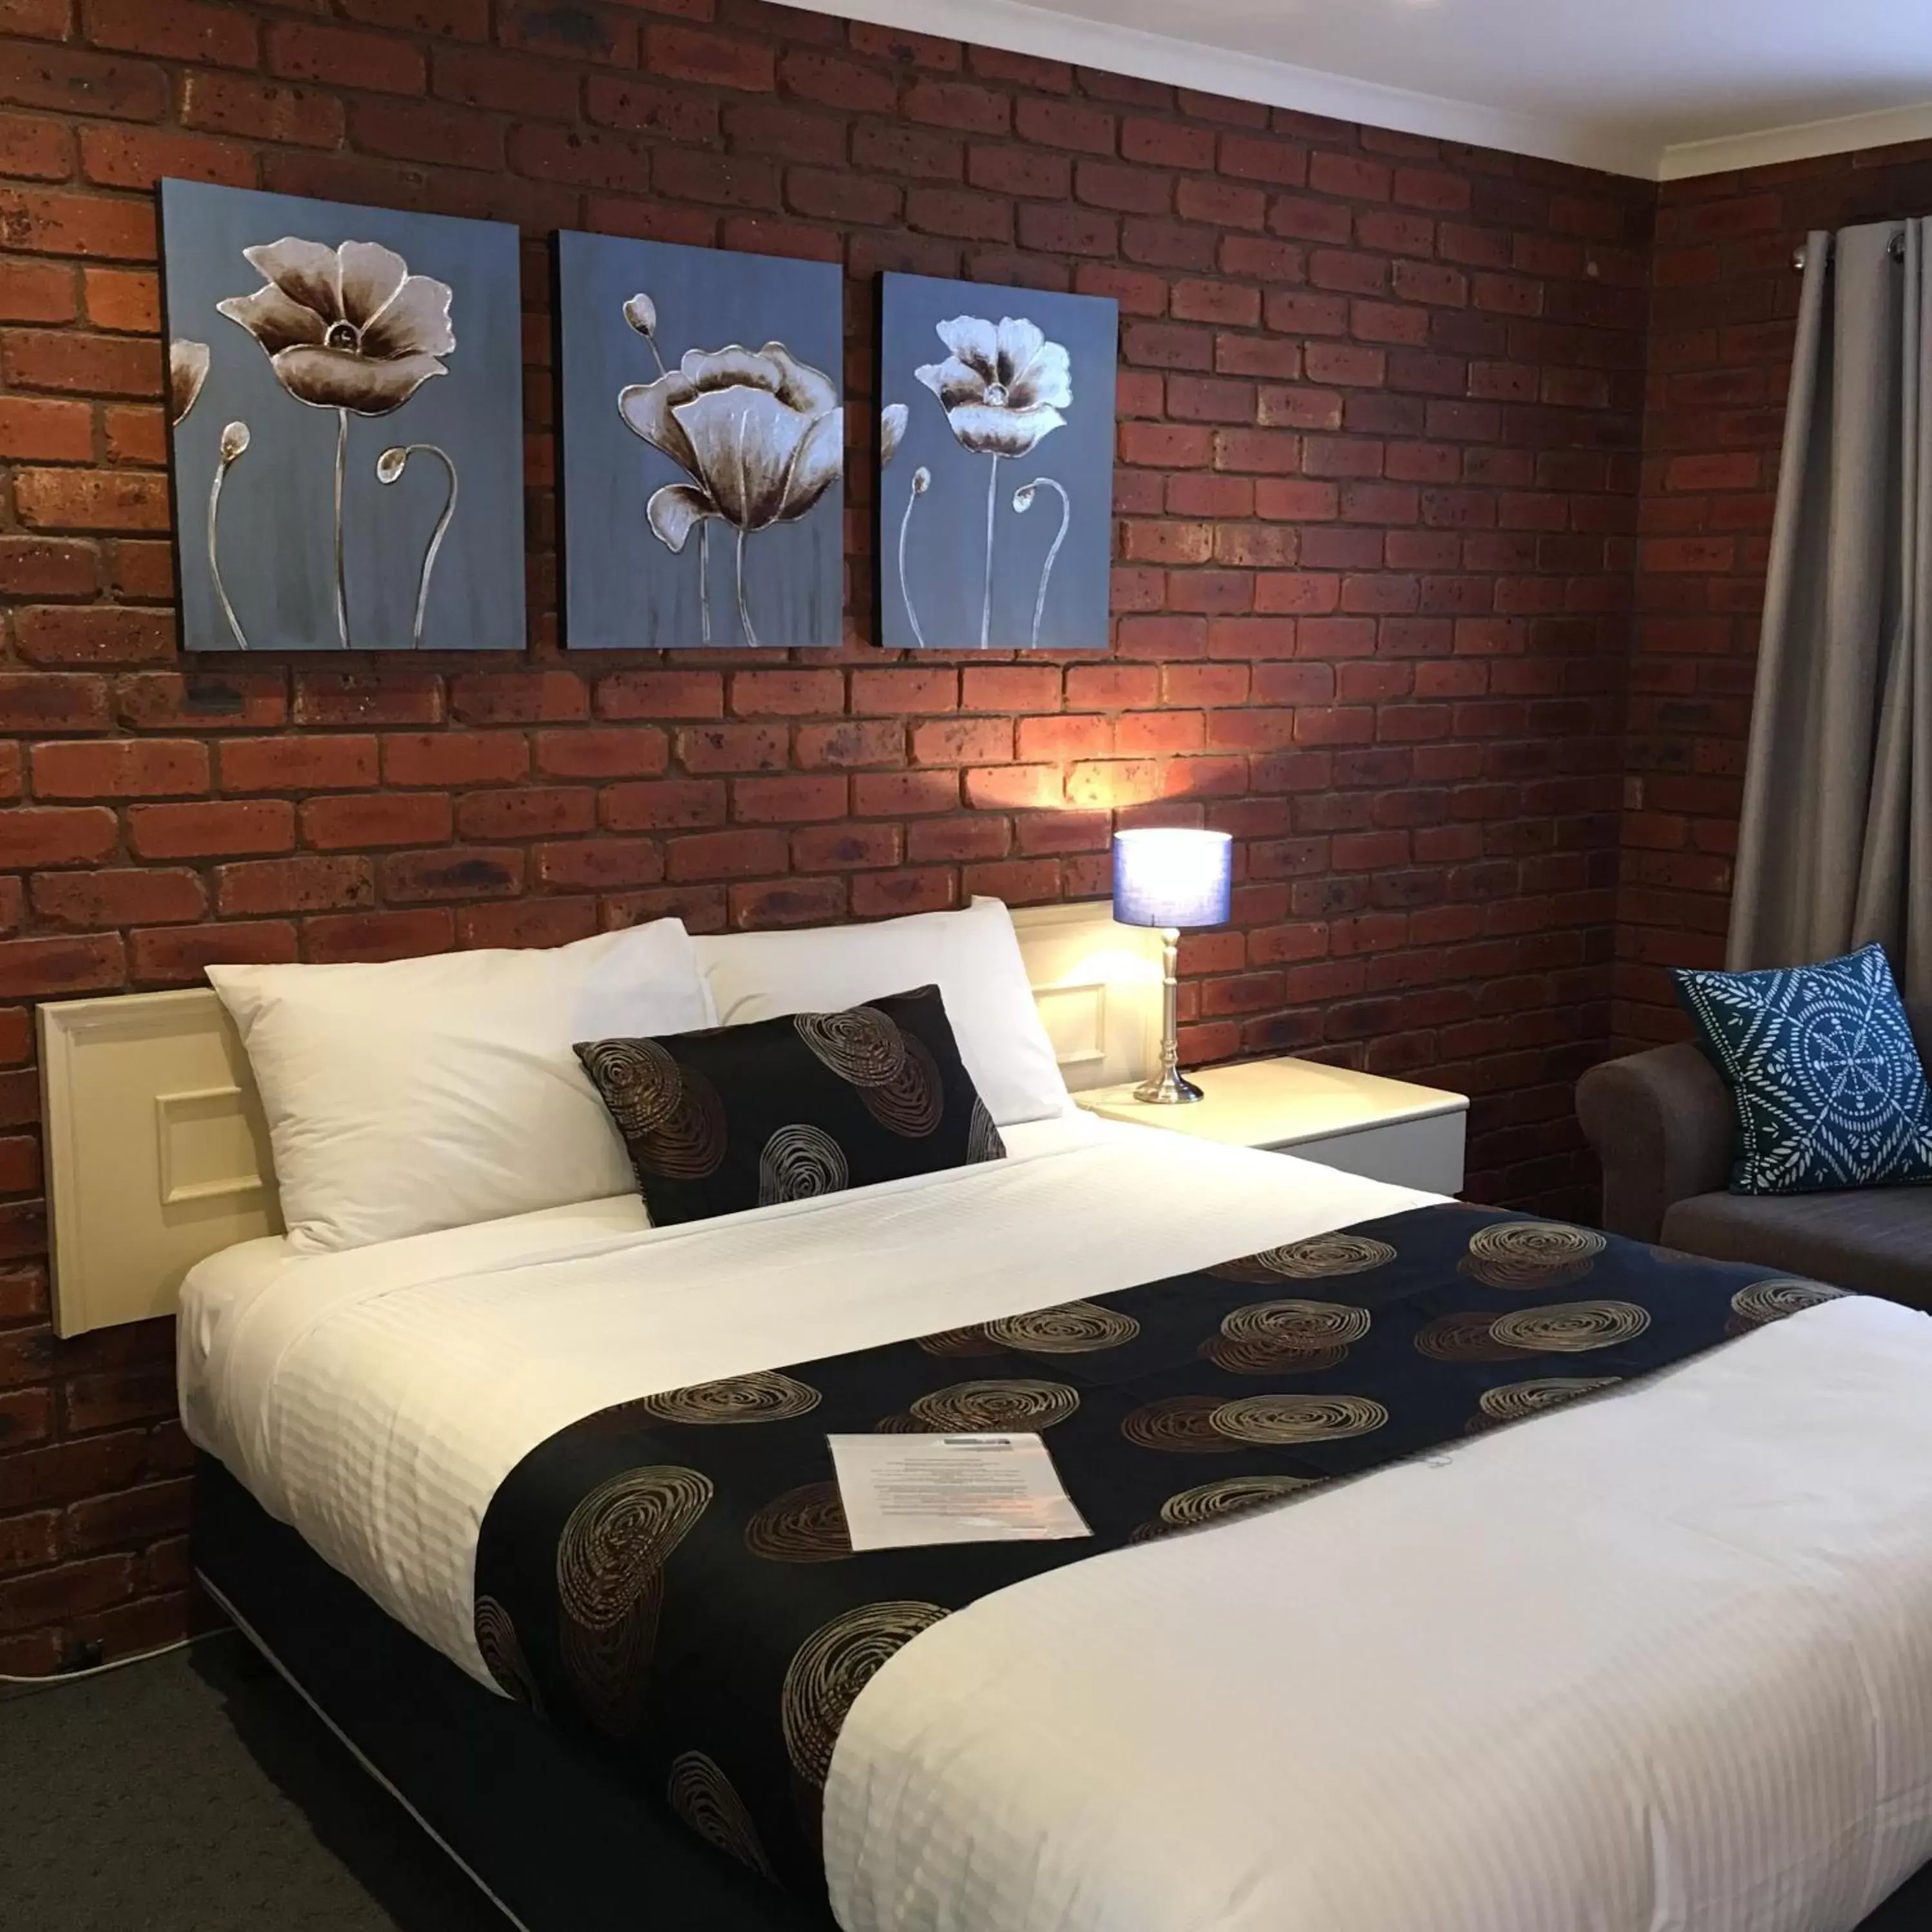 Bed in Melton Motor Inn and Apartments